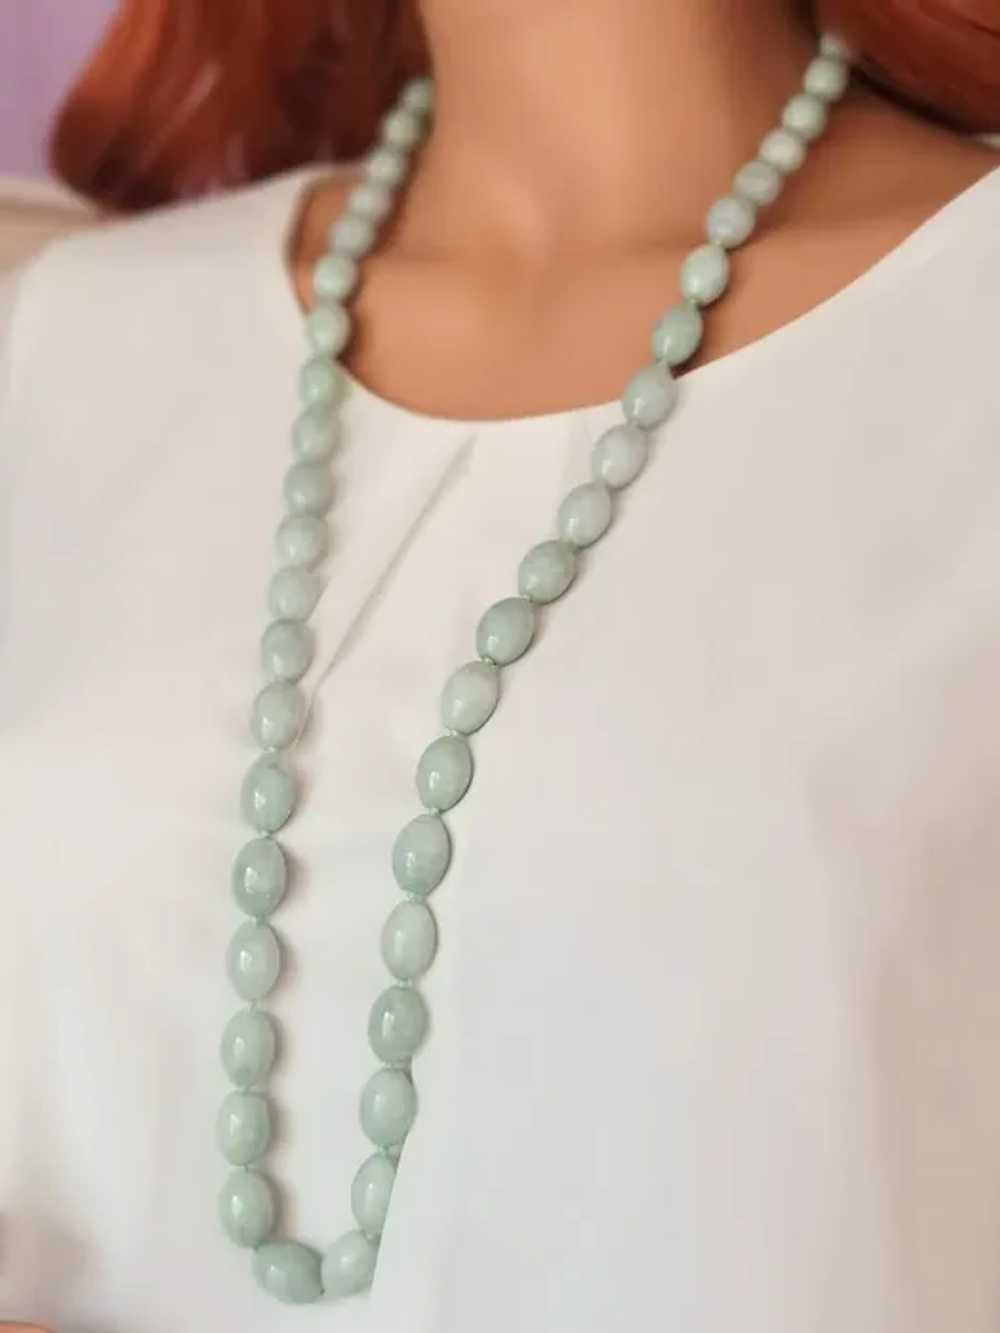 Vintage Chinese Jade Long Necklace - image 7